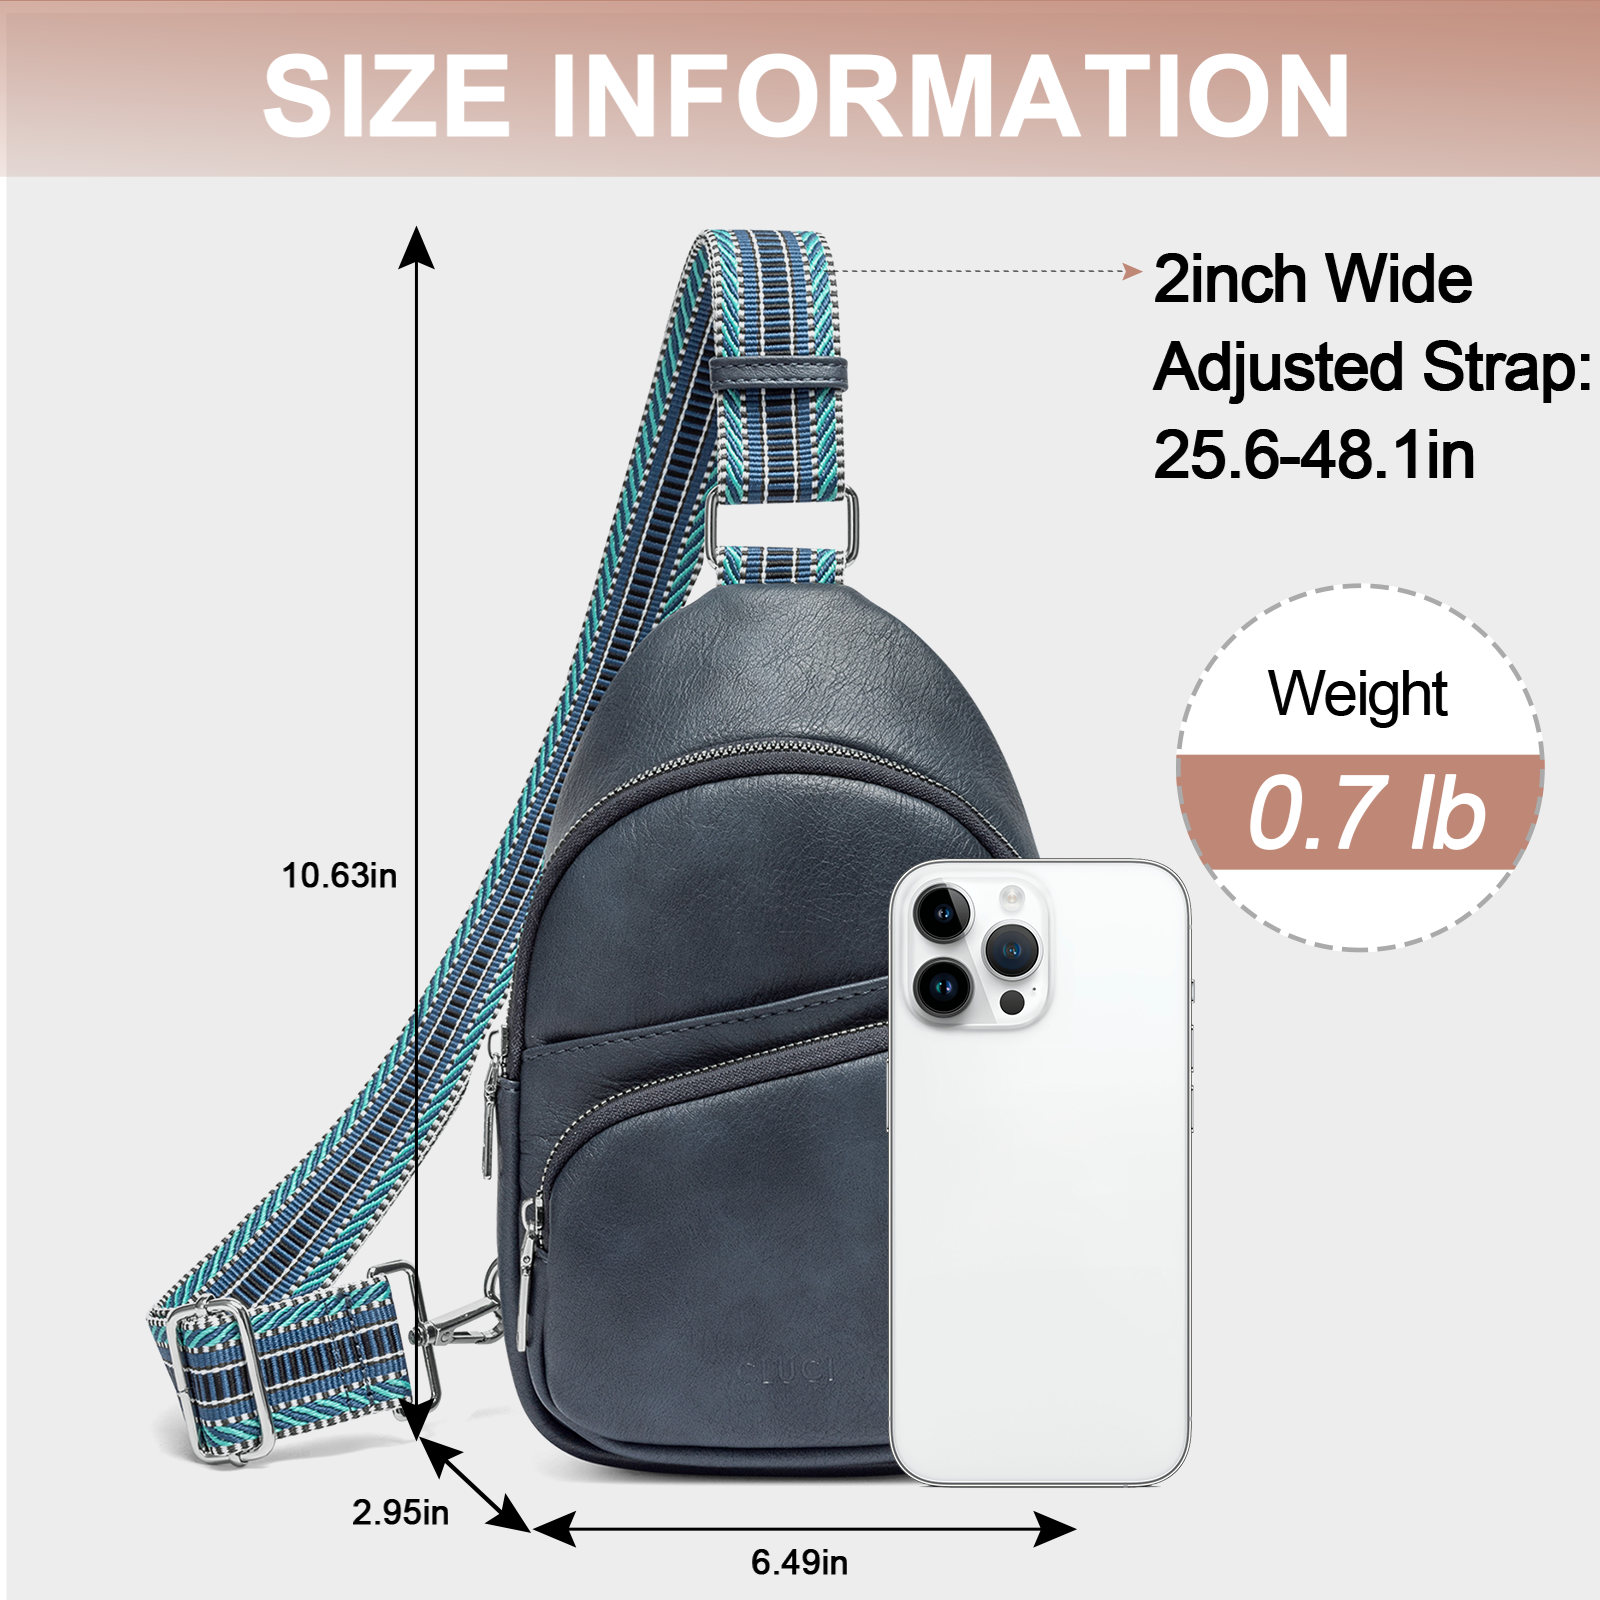 CLUCI Vegan Leather Sling Bag for Women Fanny Pack Crossbody Bags Chest Bag With Guitar Strap